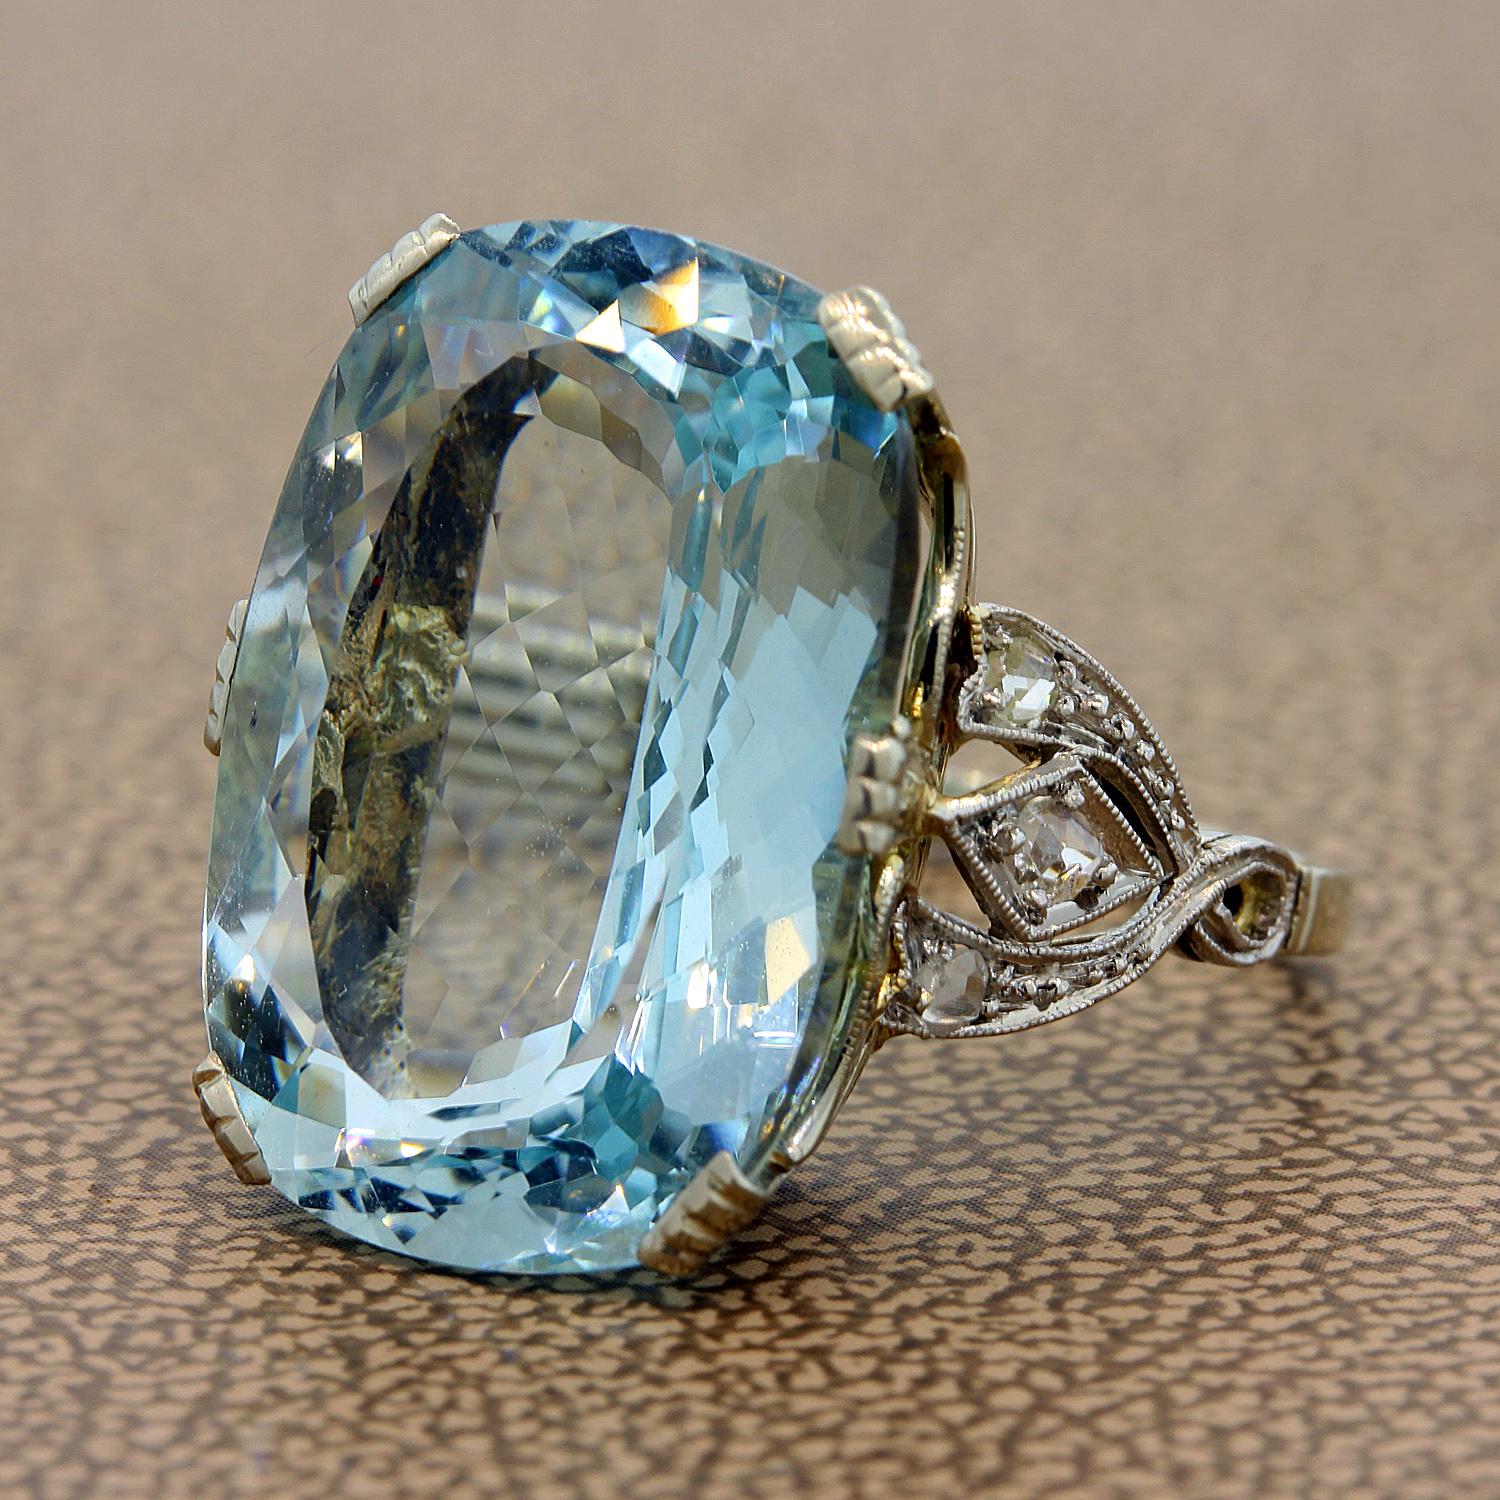 A sophisticated Parisian ring featuring a 12.55 carat aquamarine. The shimmering cushion cut aquamarine is accented by 0.10 carats of round cut diamonds in it 18K white gold filigree setting. 

Ring Size 5.25 (Sizable)
